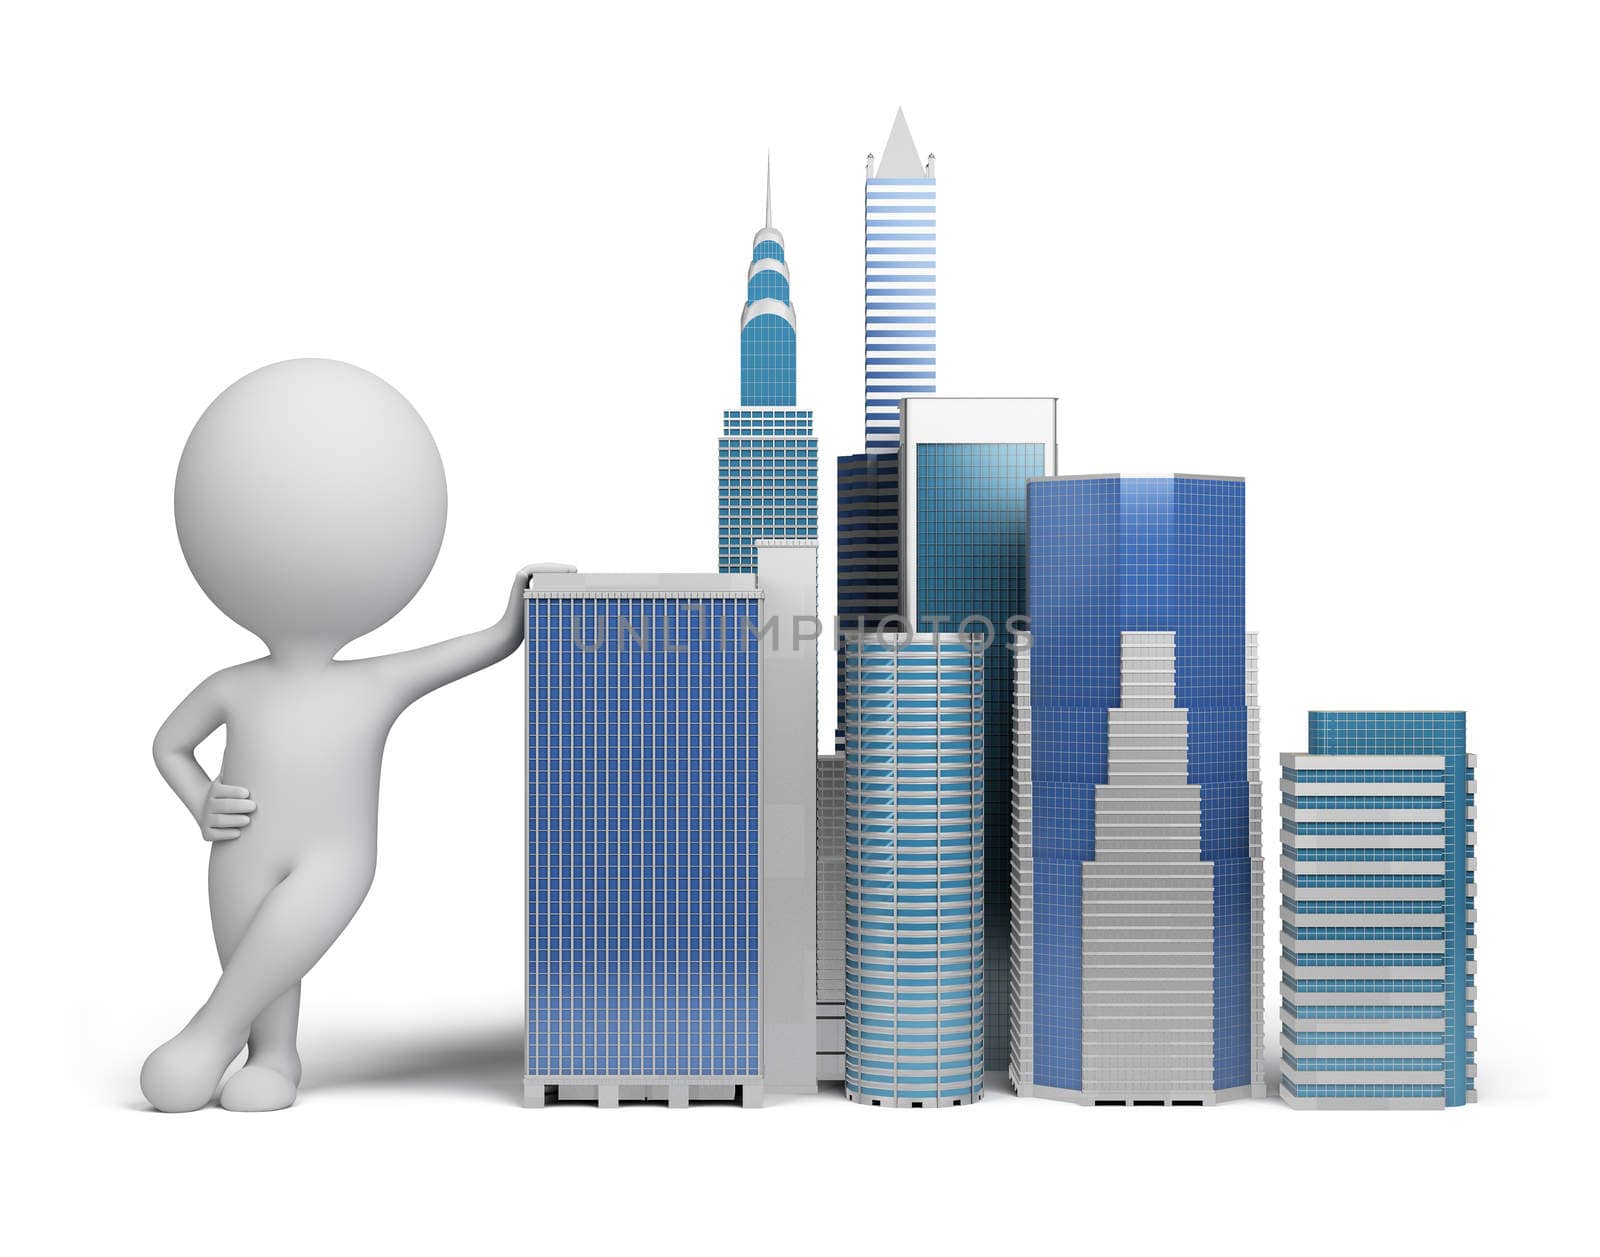 3d small person standing next to skyscrapers. 3d image. Isolated white background.